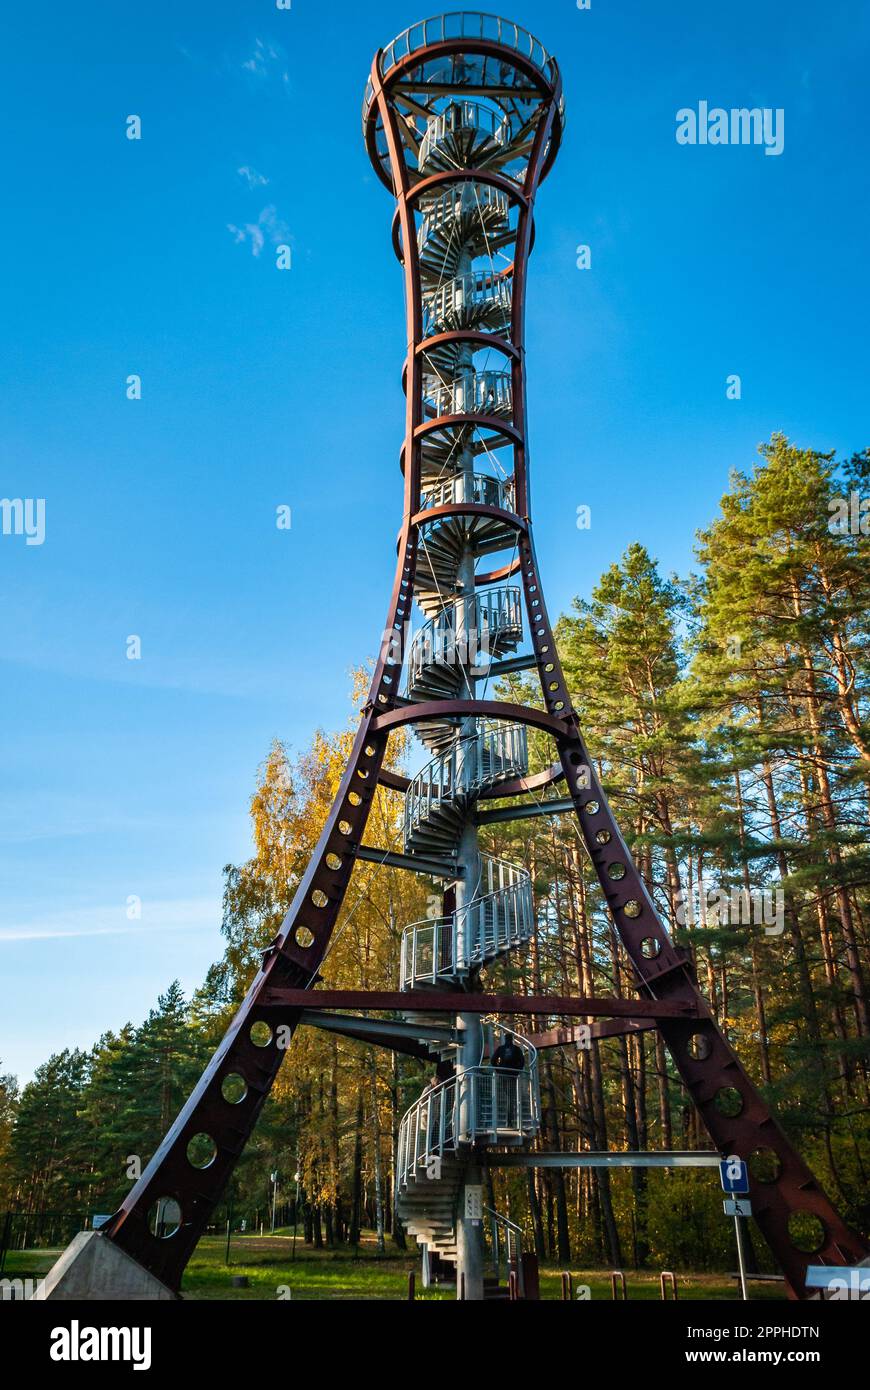 Labanoras Regional Park Tower, Lithuania. The tallest observation tower in Lithuania on the shore of Lake Baltieji Lakajai in Labanoras Regional Park. Stock Photo